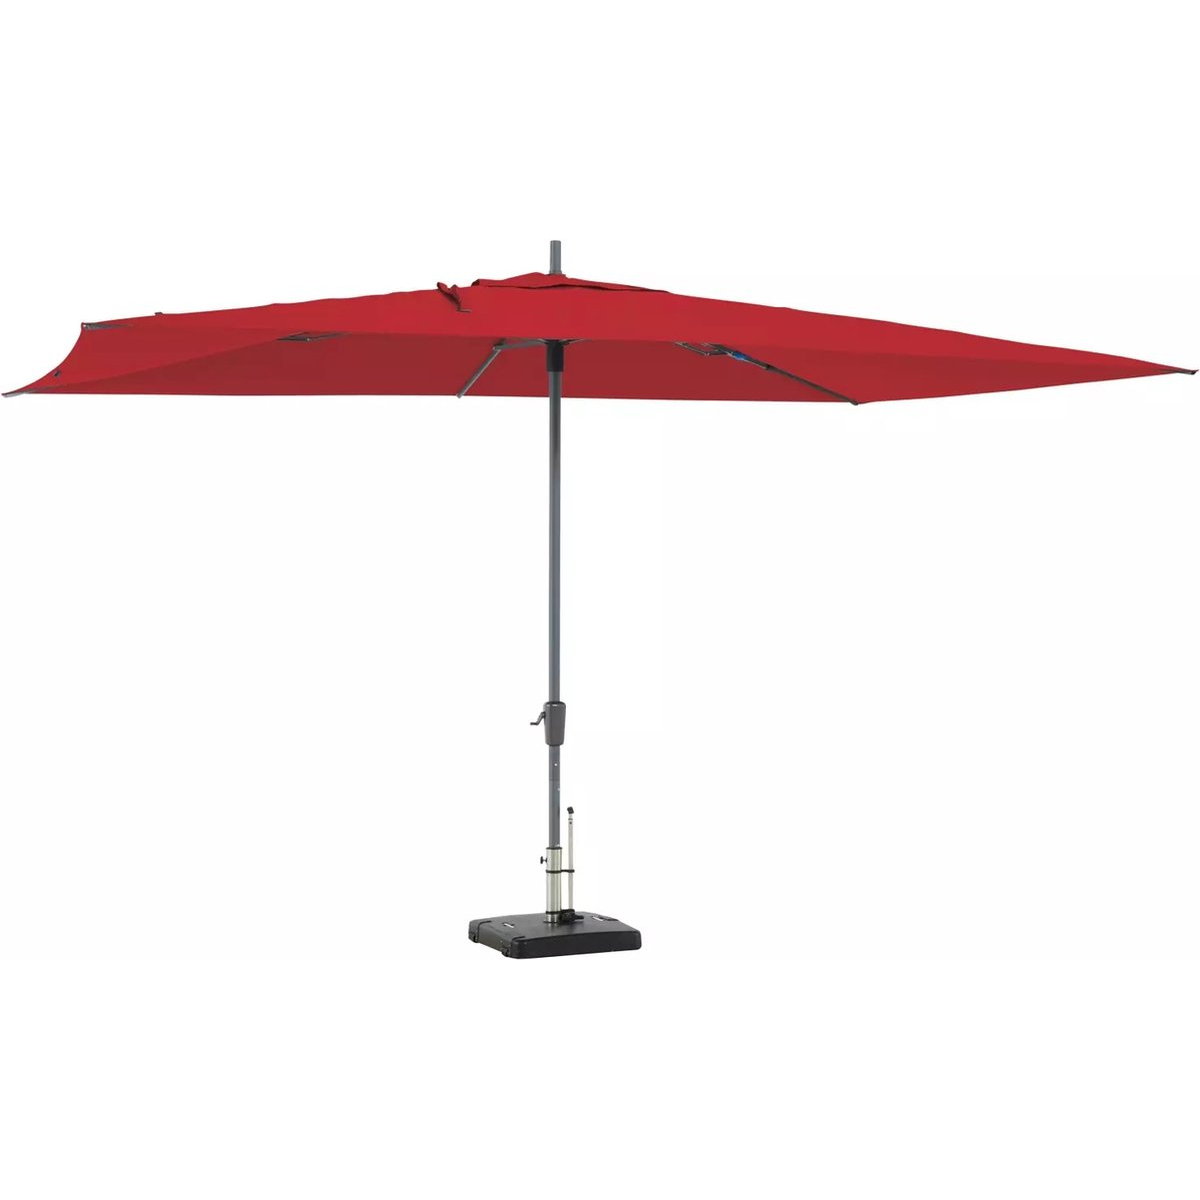  Madison - Parasol Rectangle Brick Red - 400x300 - Rood 